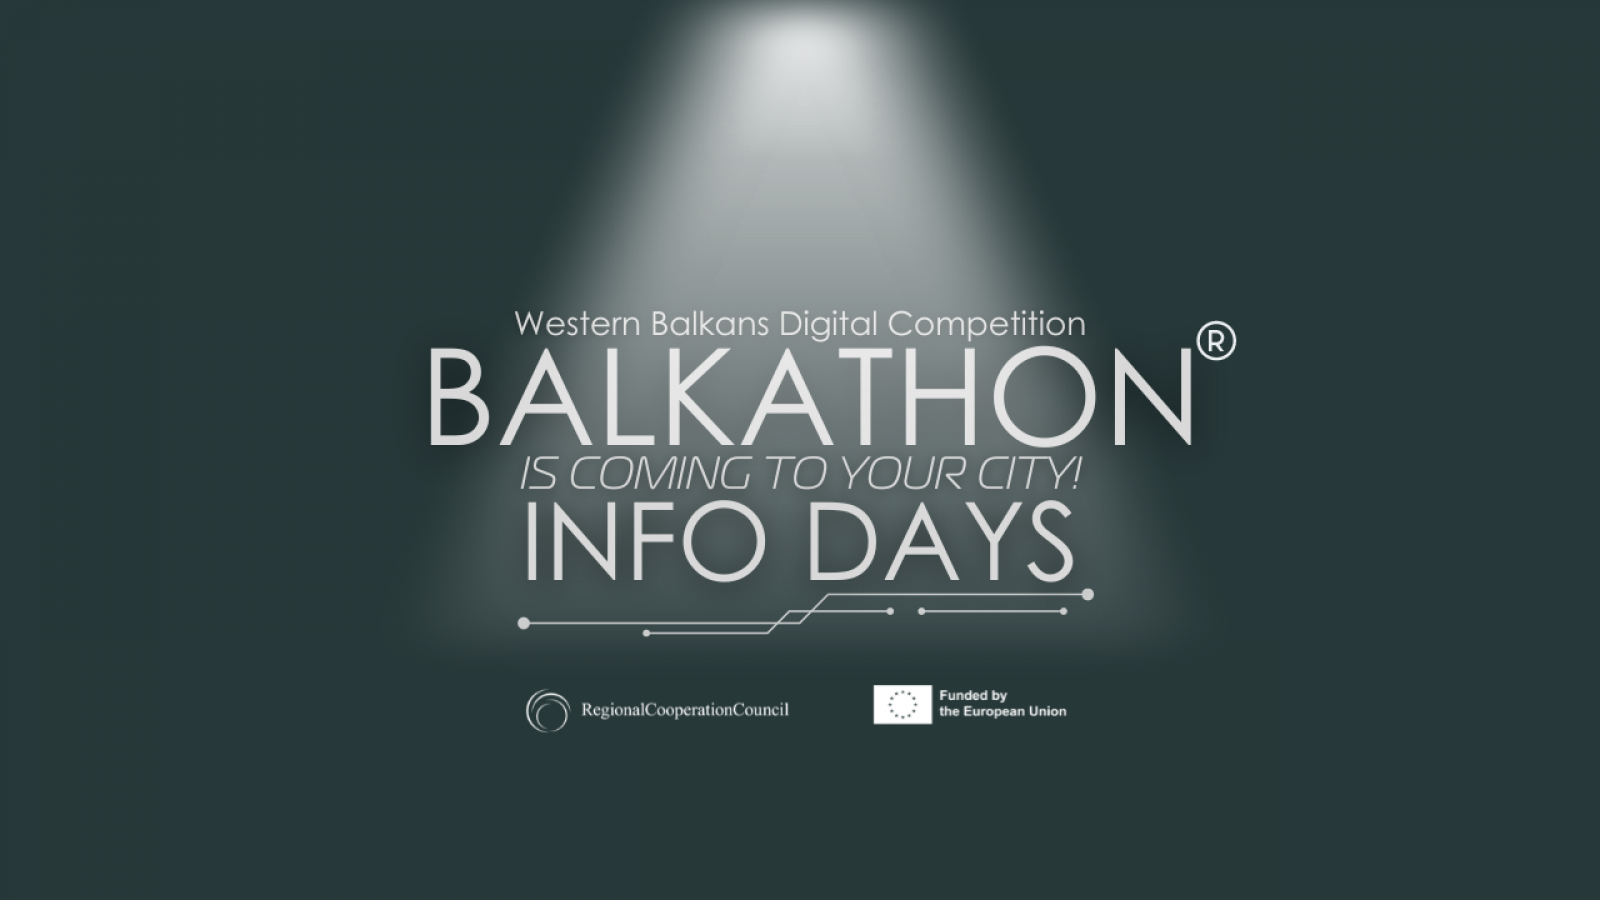 Balkathon Info Days are Coming to Your City! 🌍